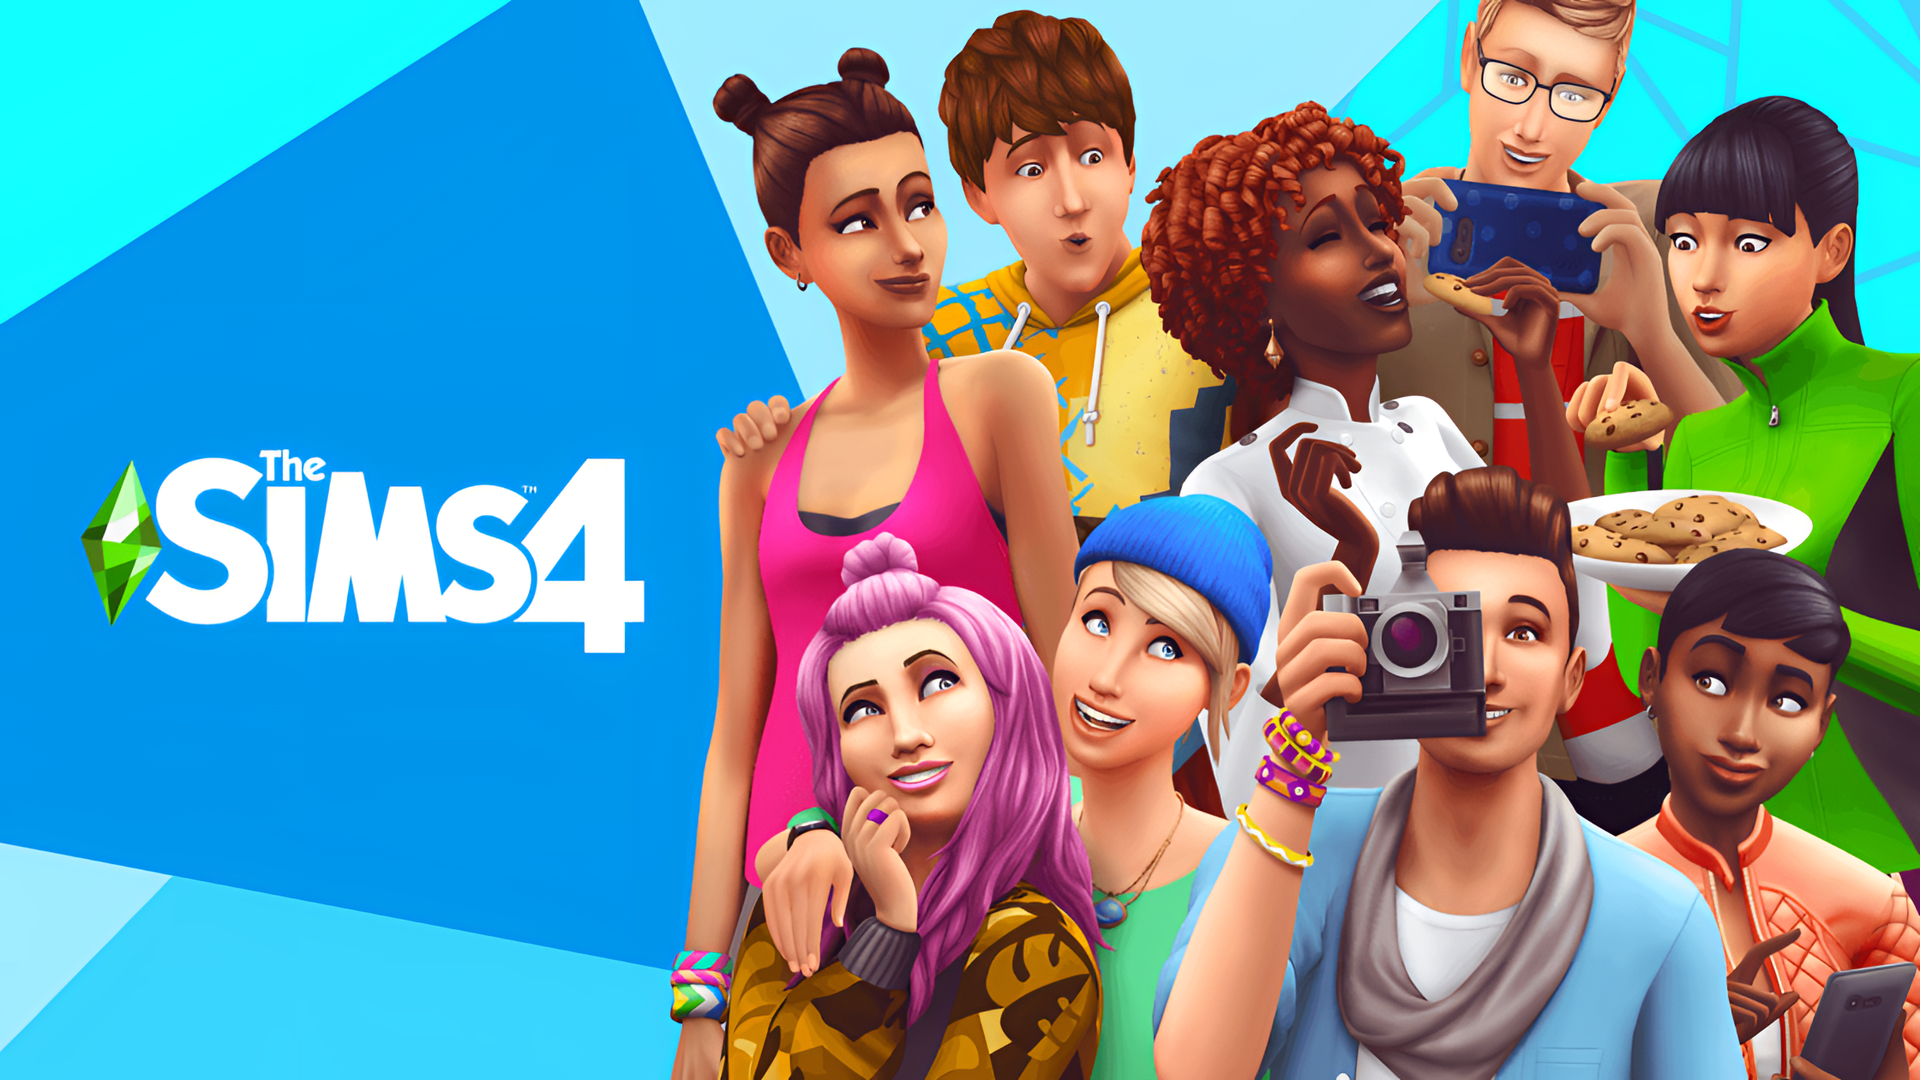 10 Years After Launch, A 'Special Team' Is Tackling All The Issues in The Sims 4